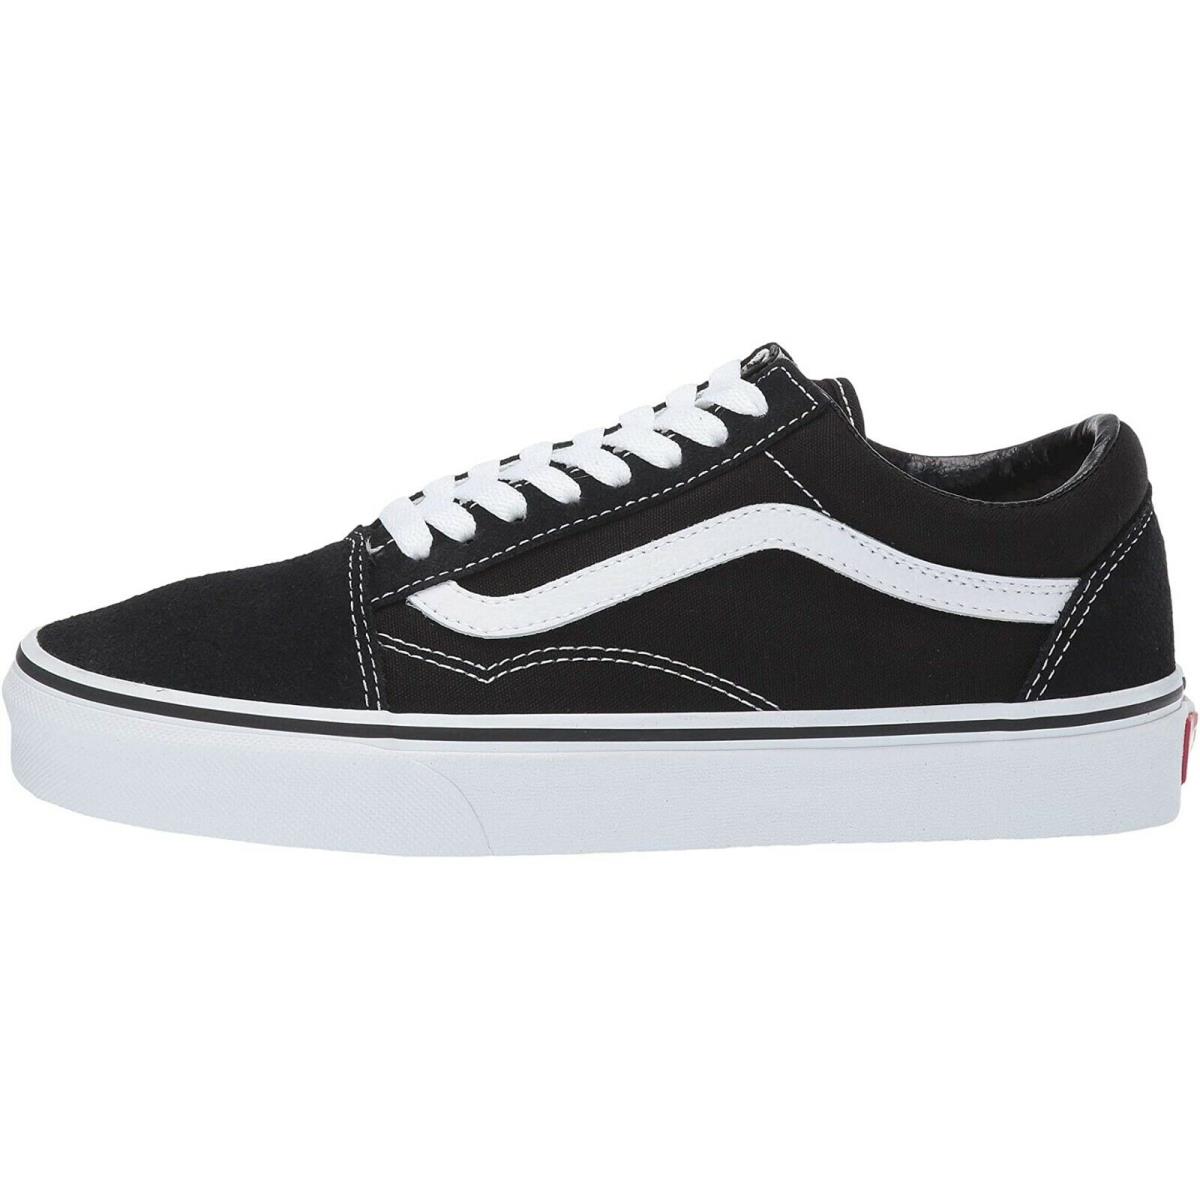 Vans shoes Off The Wall - Black & White 0